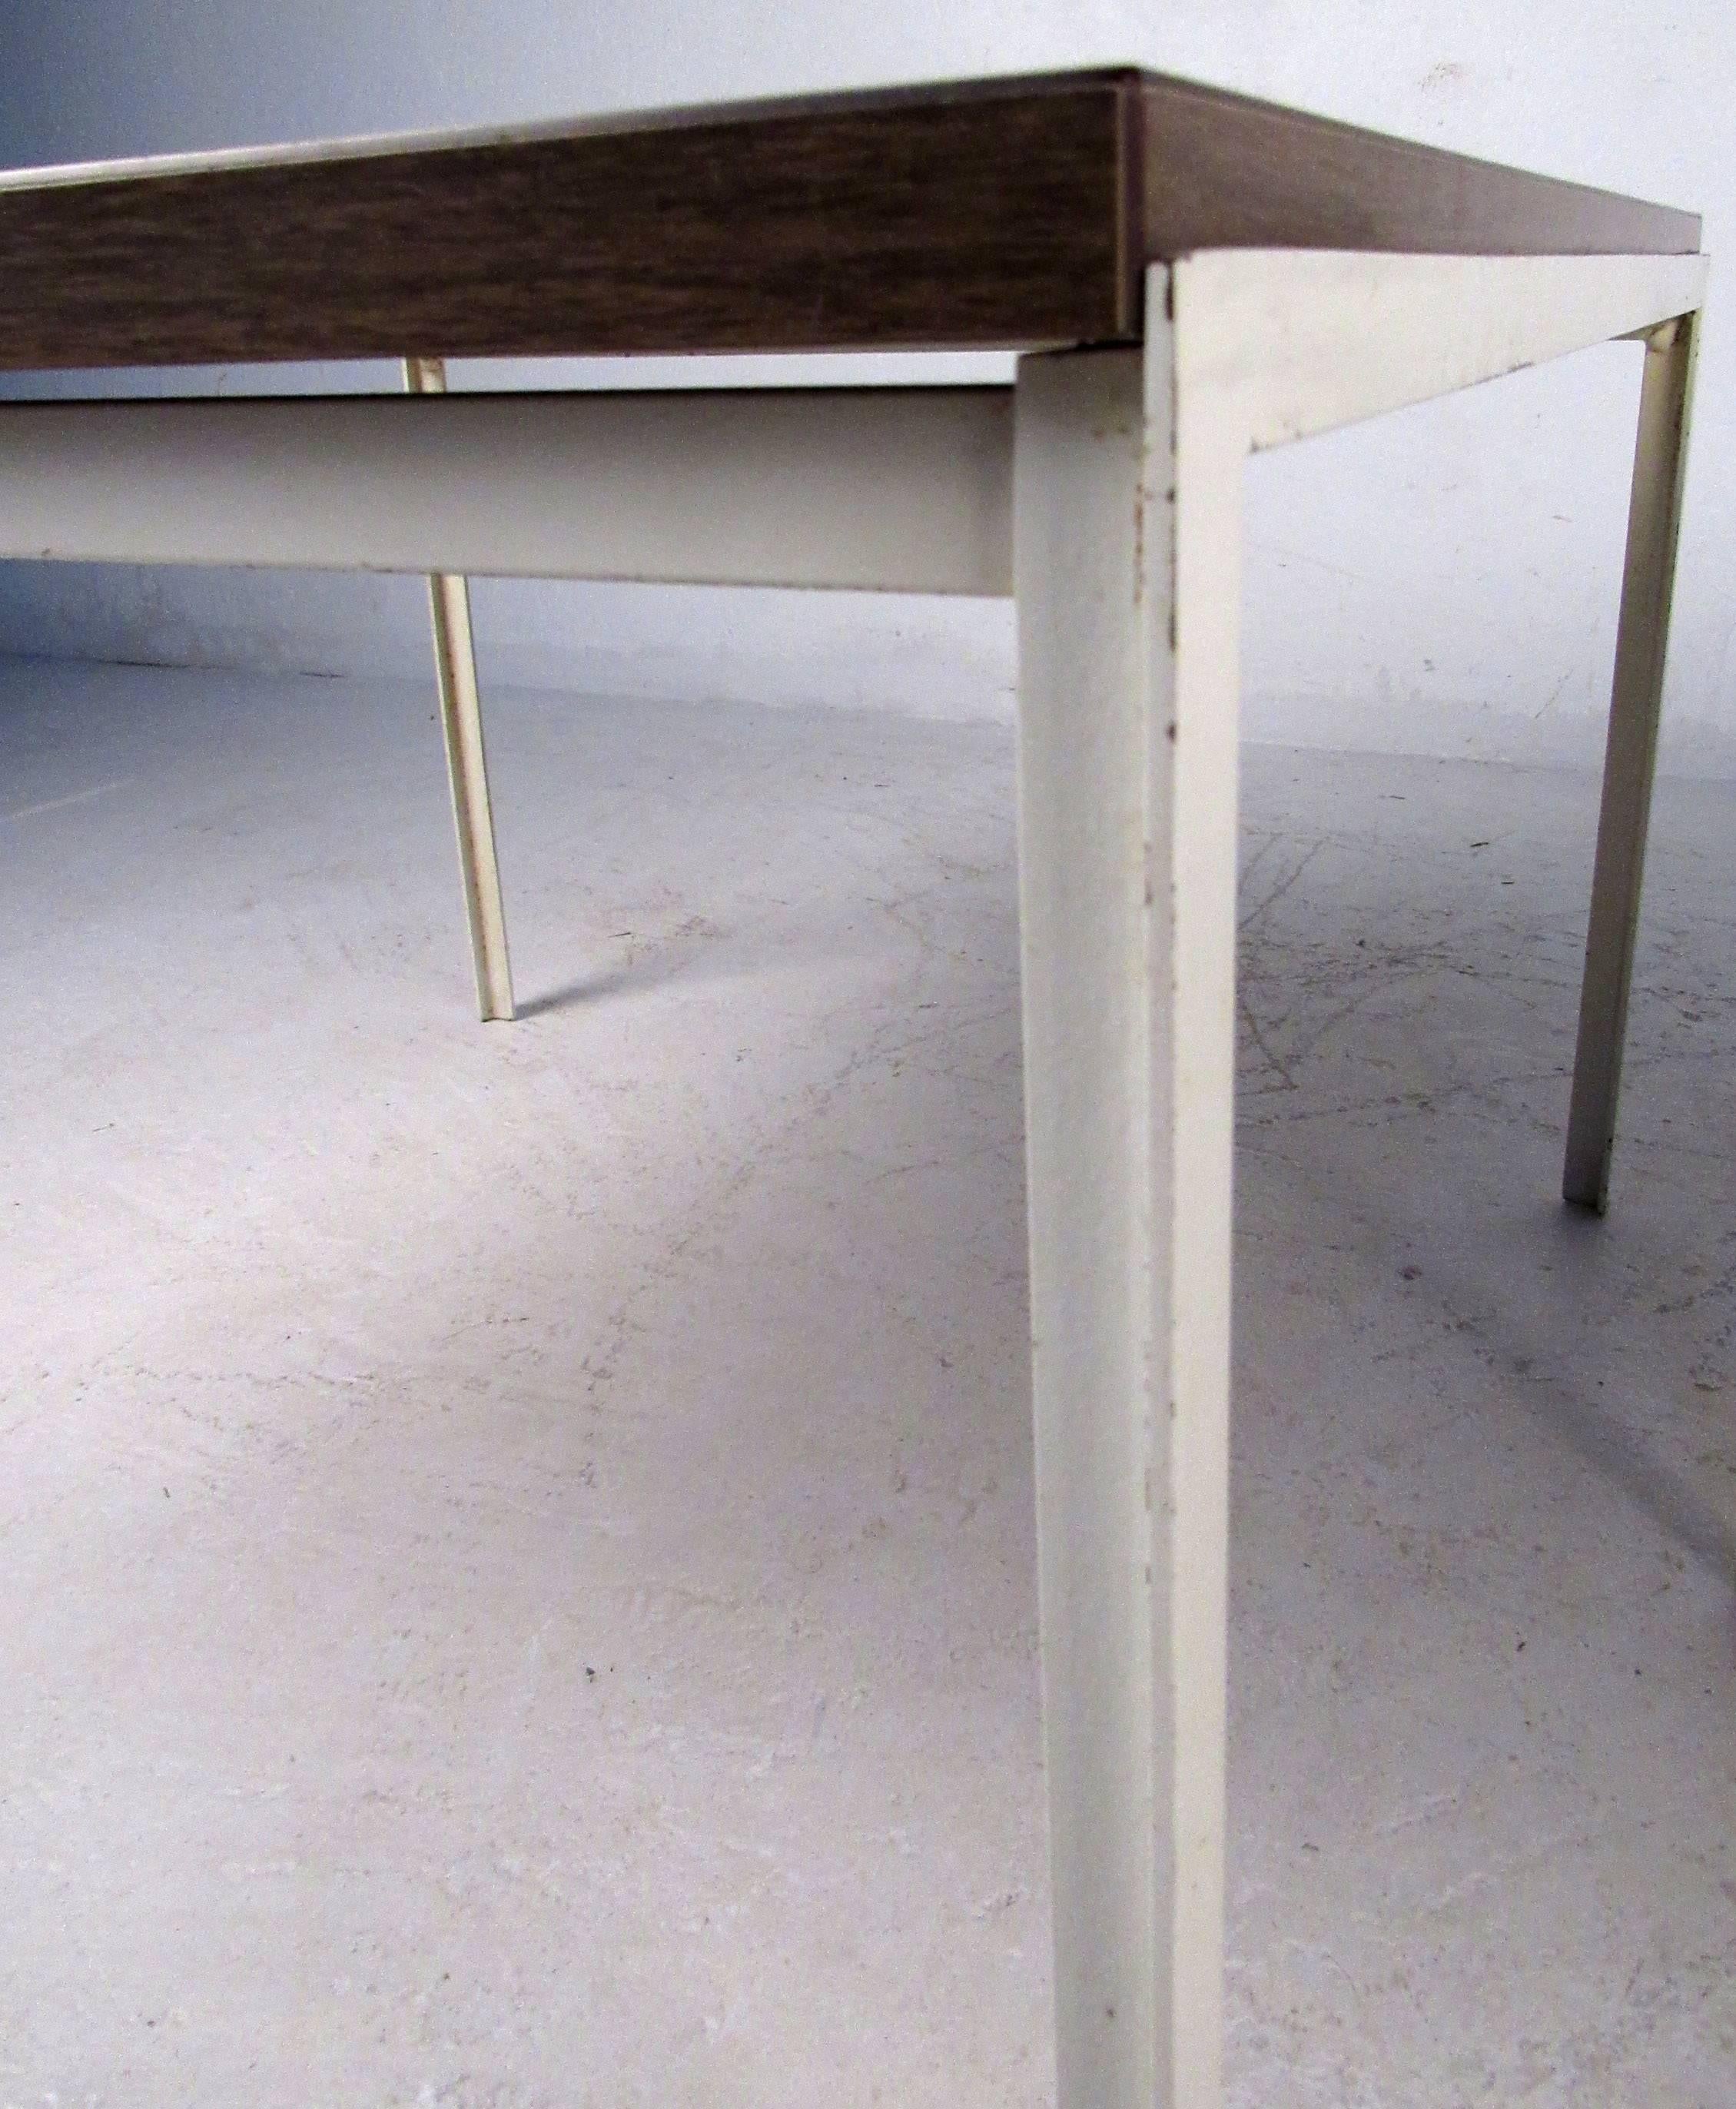 Two vintage-modern side tables featuring sleek design with Formica wood finish to top and metal base. Manufactured by Knoll.

Please confirm item location NY or NJ with dealer.